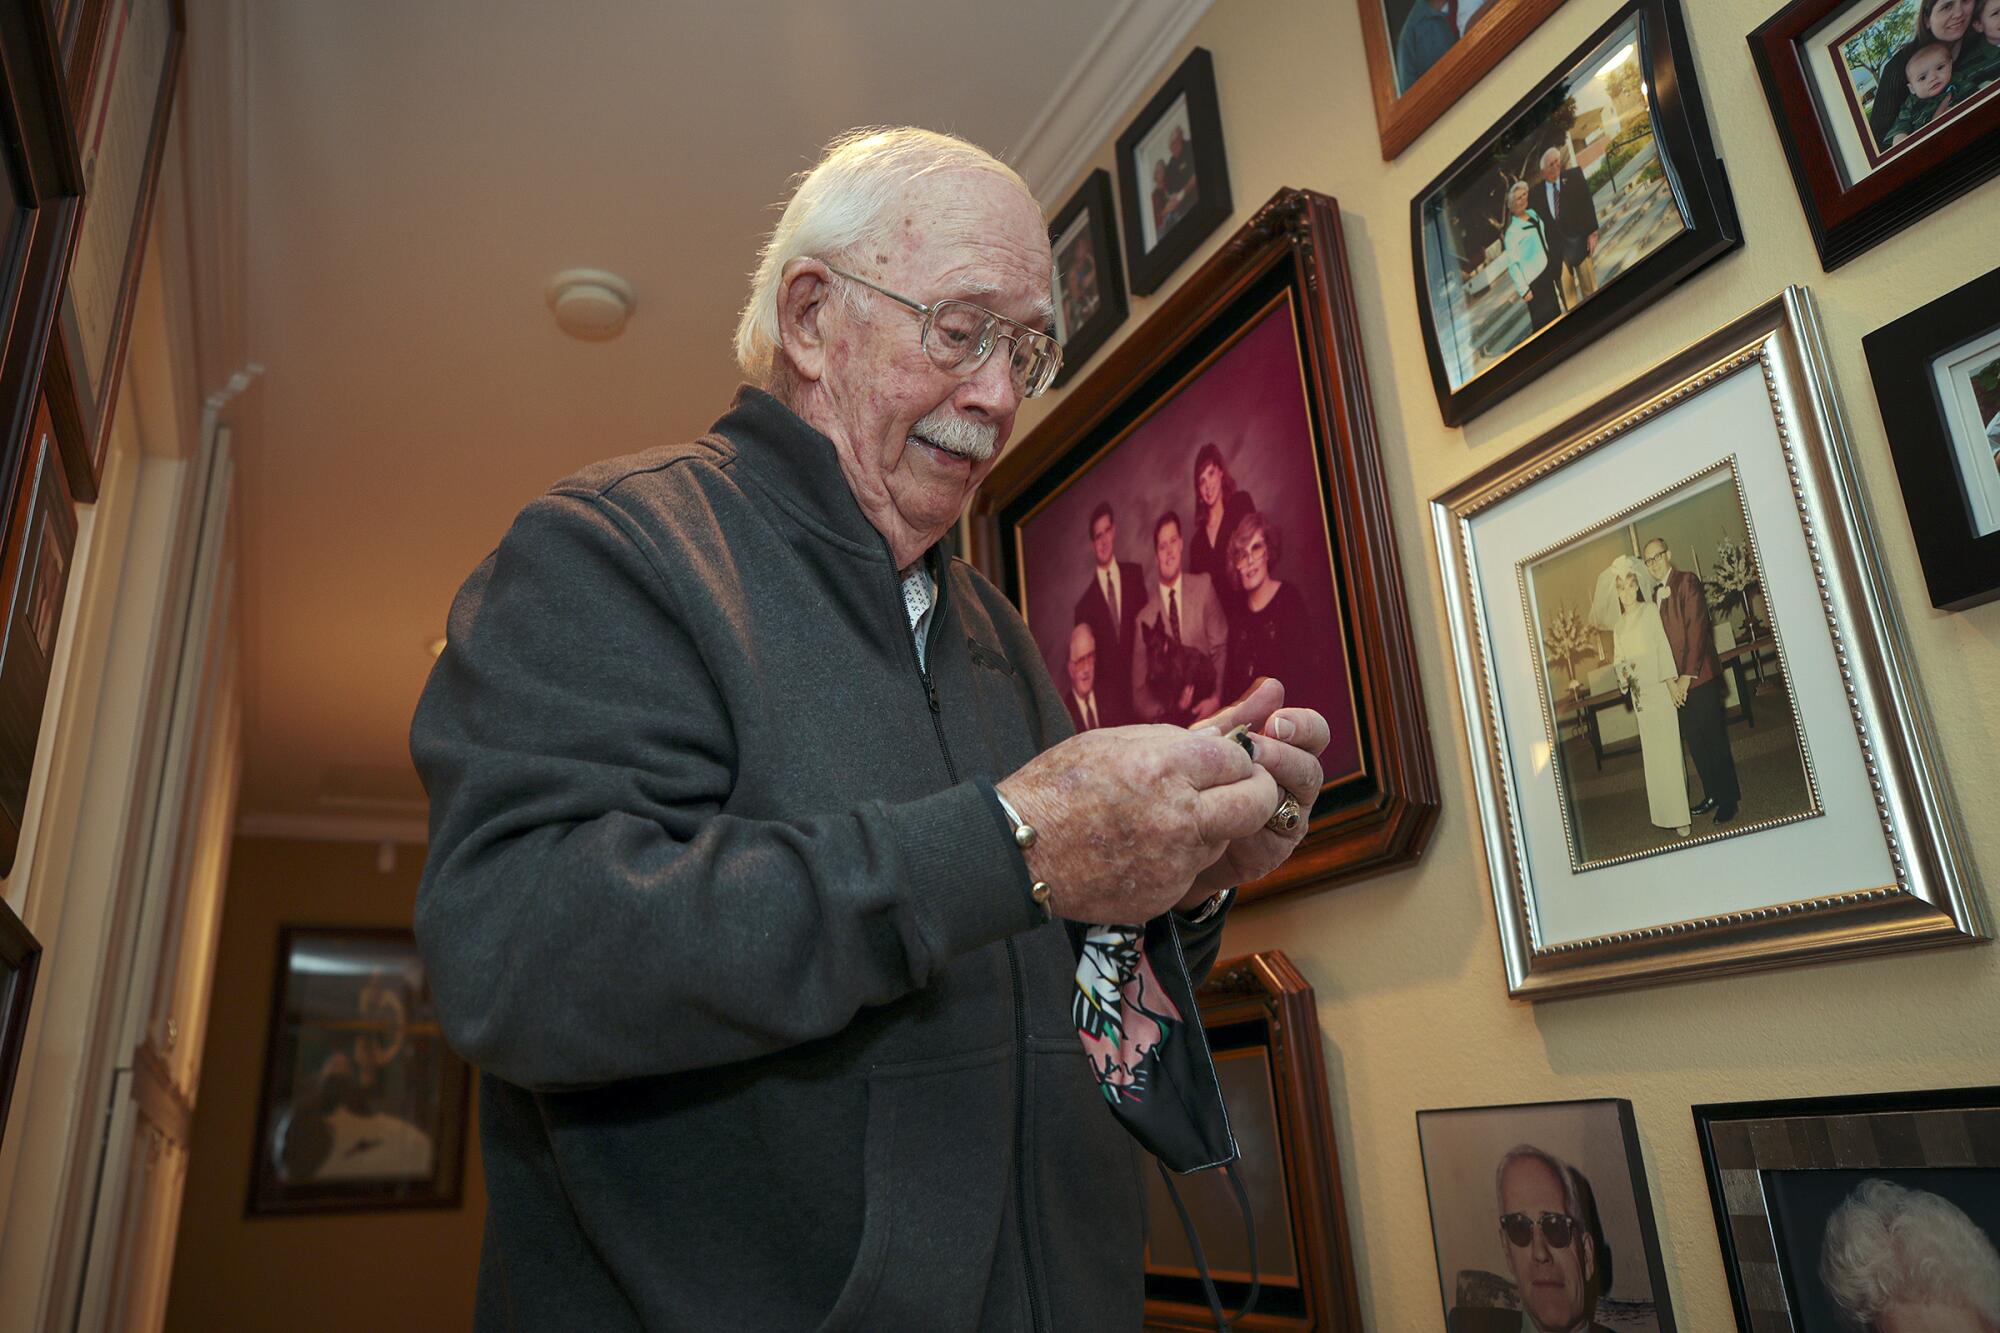 An elderly man looks at a handkerchief in his hands while standing next to a wall of family photos in his home